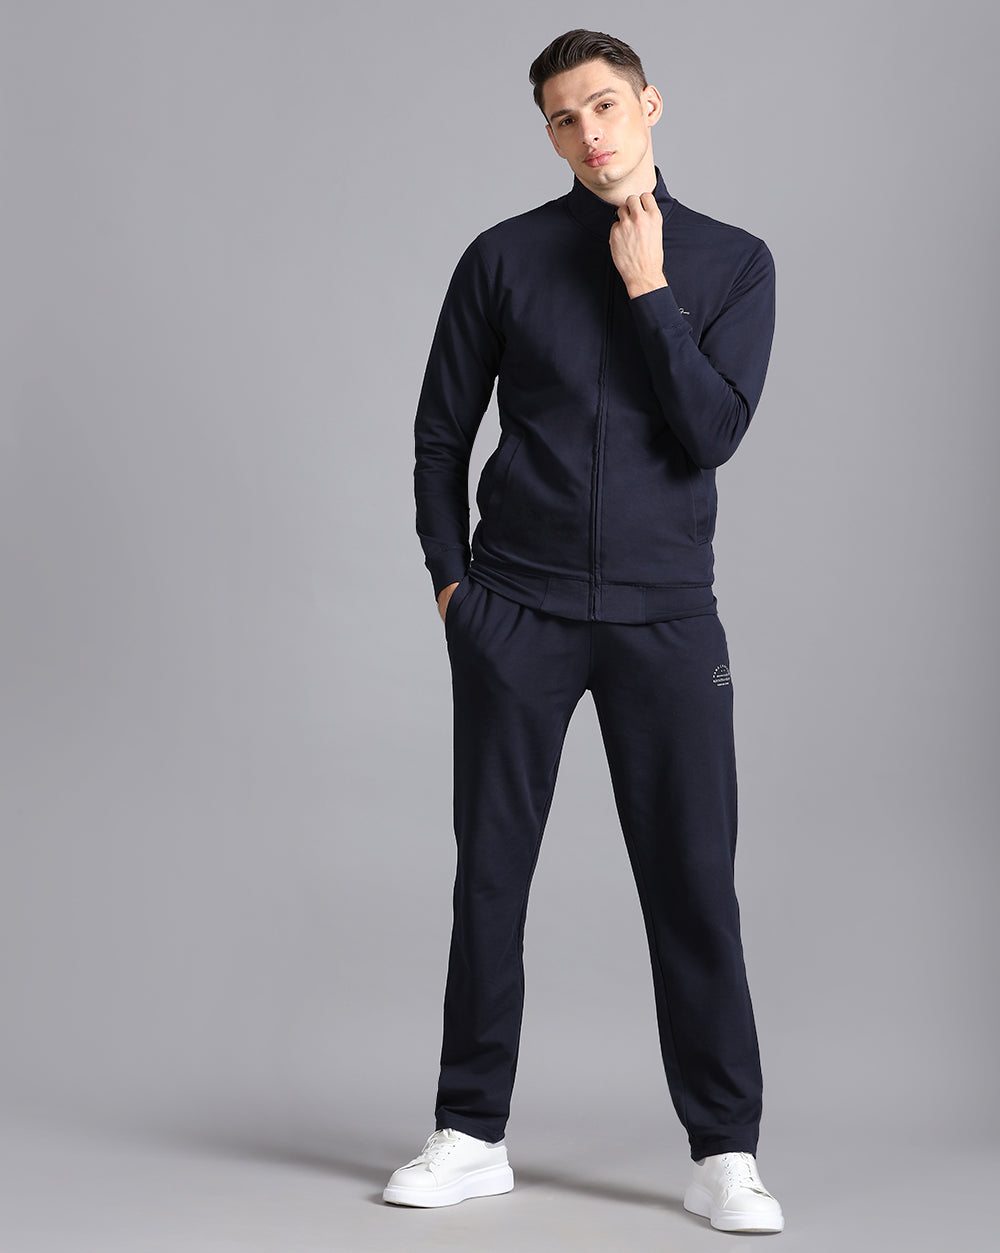 Solid Running Navy Track pant